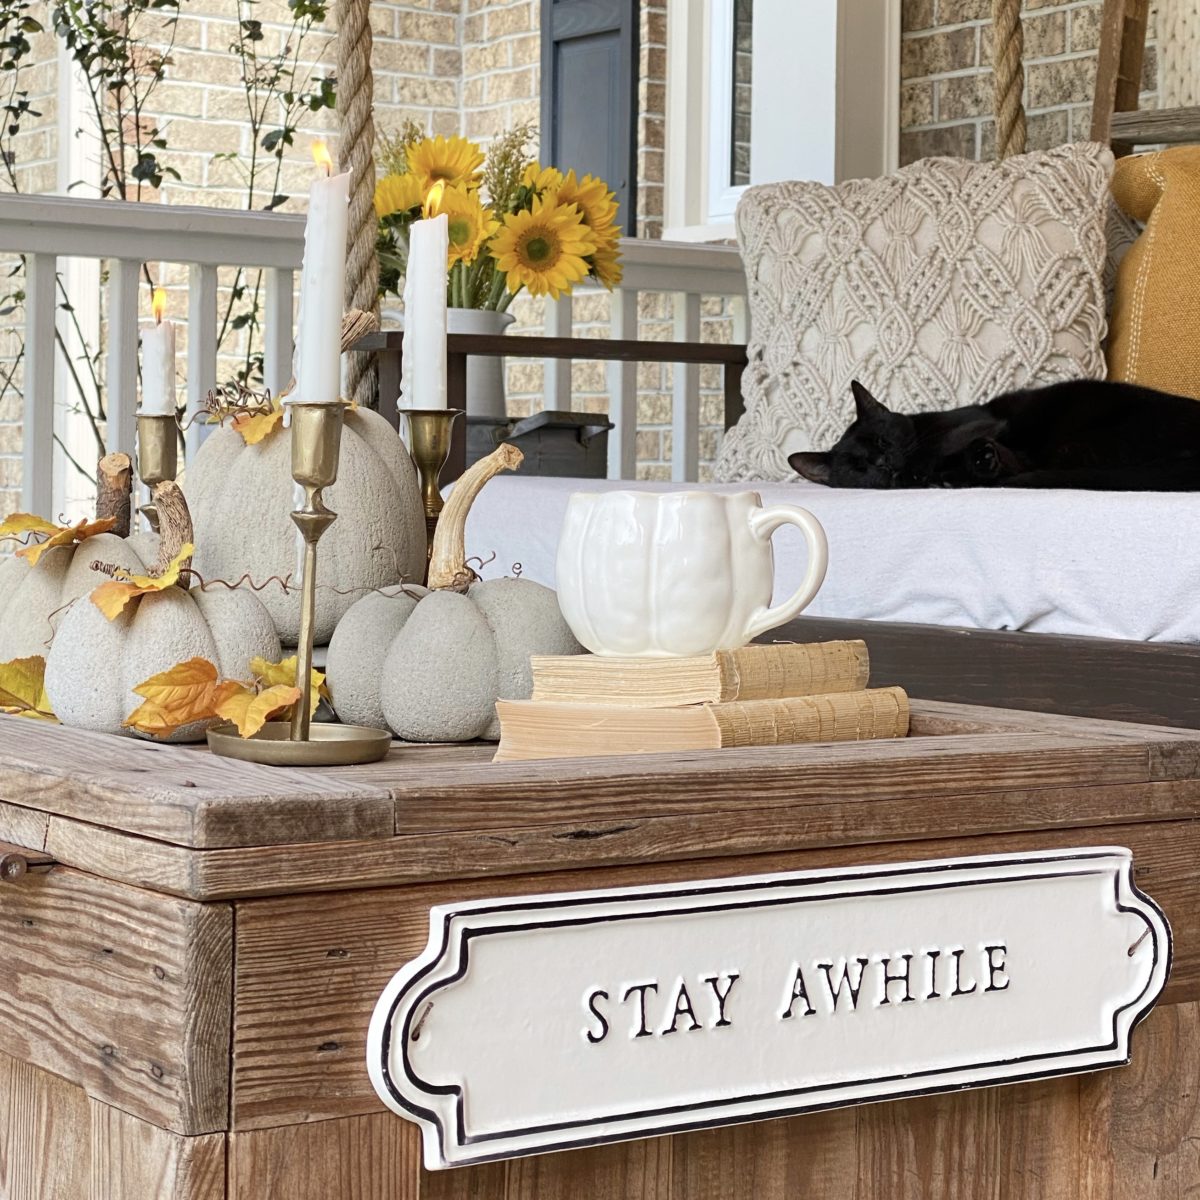 A coffee table on the front porch decorated with DIY concrete pumpkins, brass cradle holders with white candles, books, and a white pumpkin coffee mug. In the background is a black cat sleeping the porch swing.